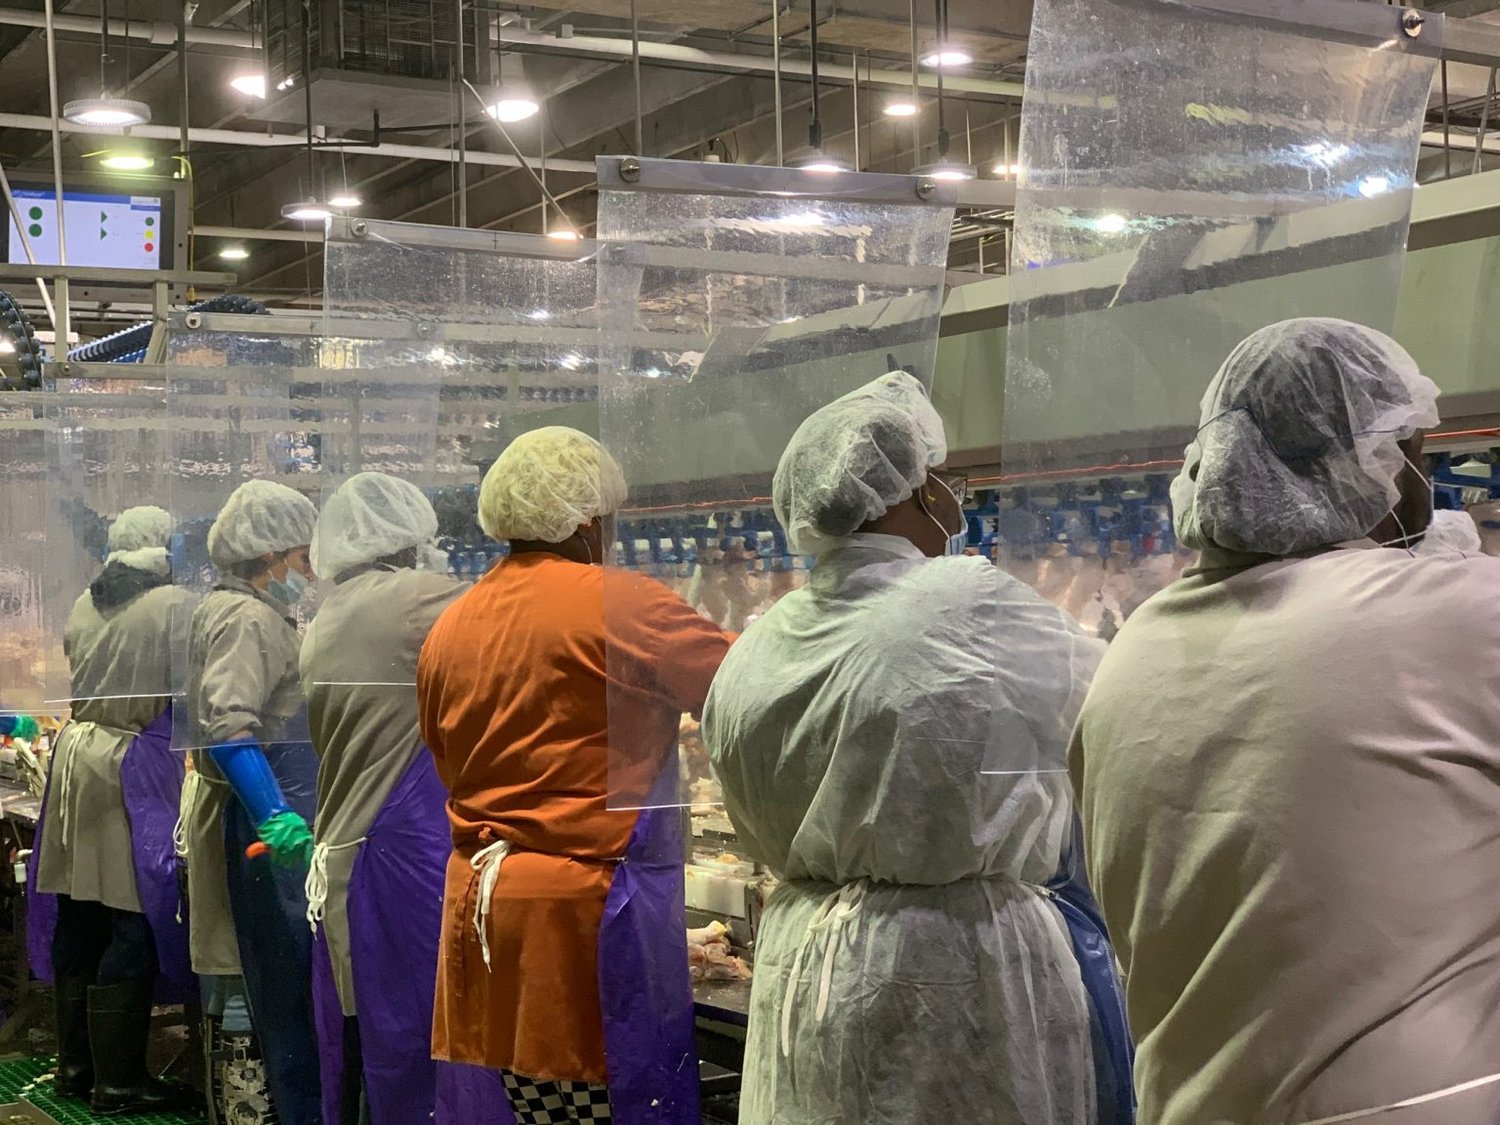 An Iowa meatpacking plant had plastic dividers installed separating workers on the production line.